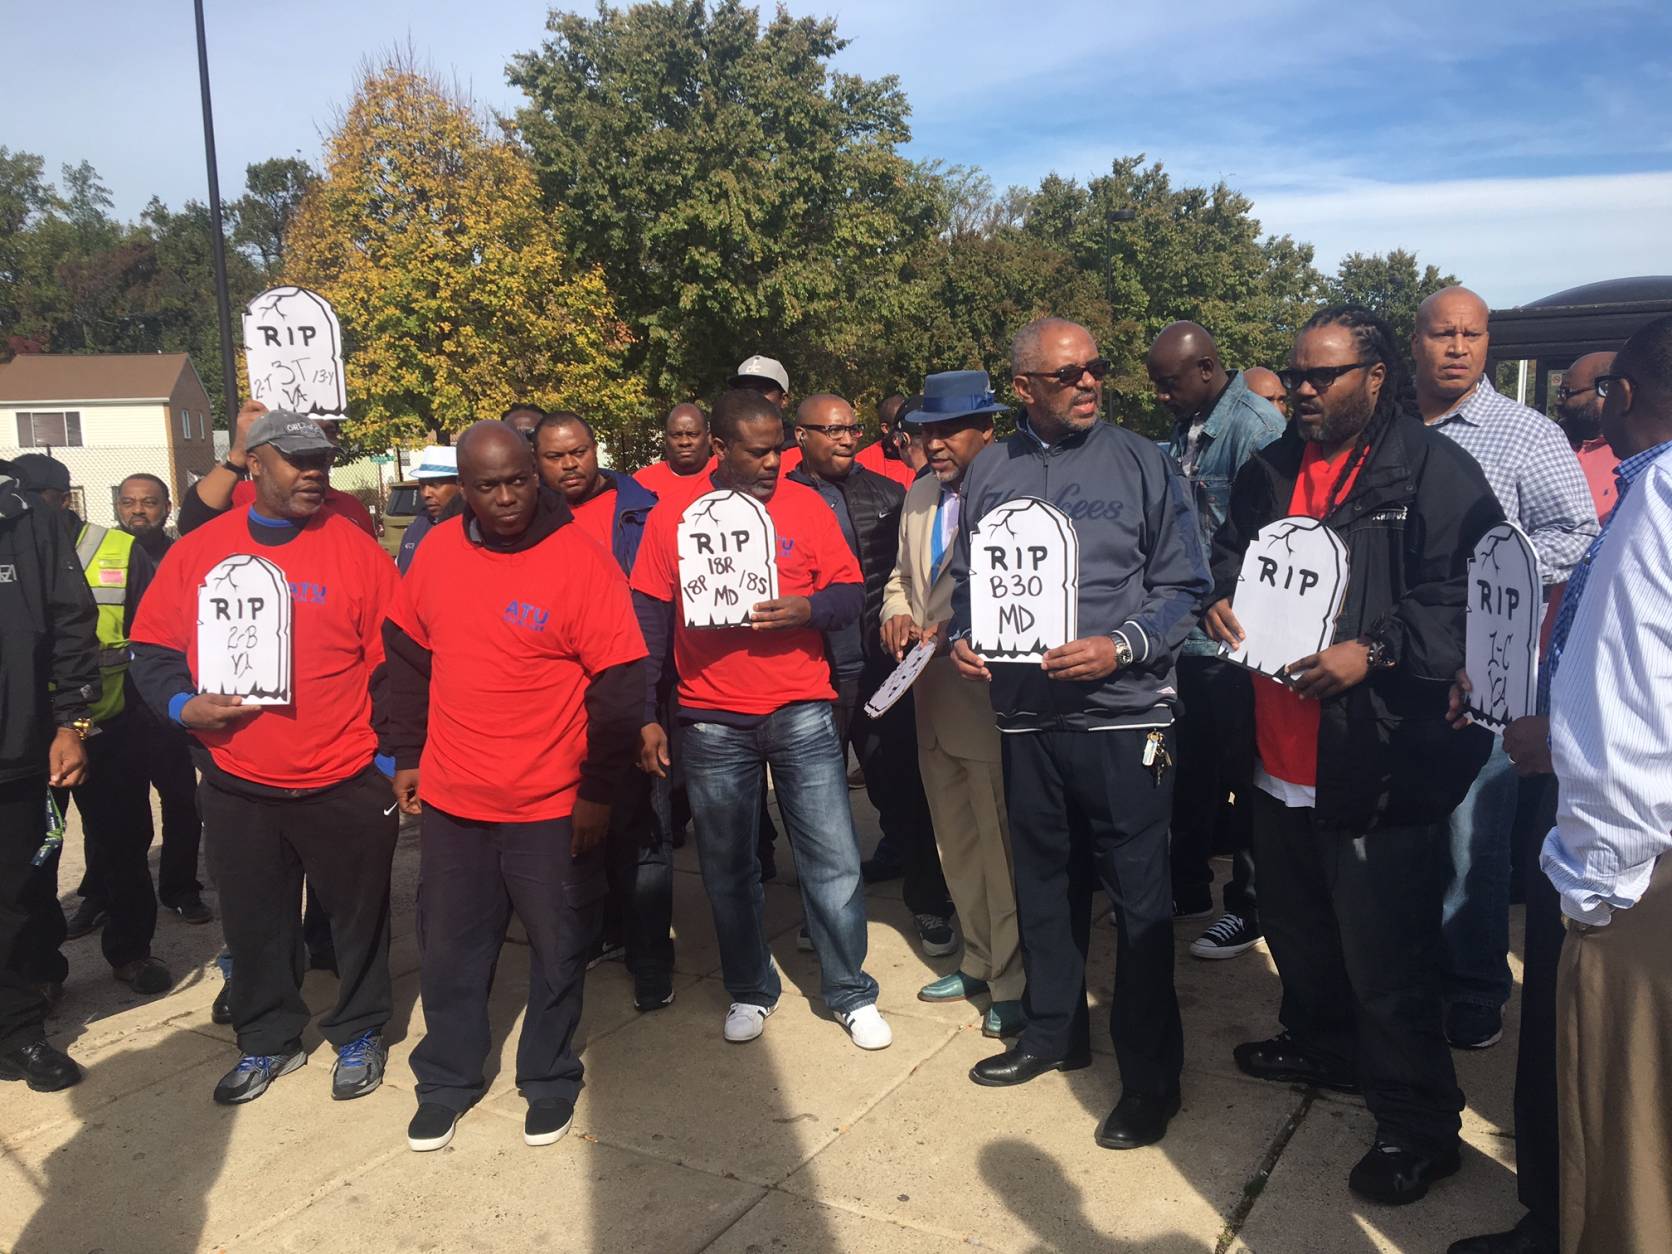 Members of Metro's largest union rallied outside a Metro station outside D.C. on Monday, Oct. 31, 2016 in protest of proposals they say would lead to the transit system's demise. (WTOP/Max Smith)